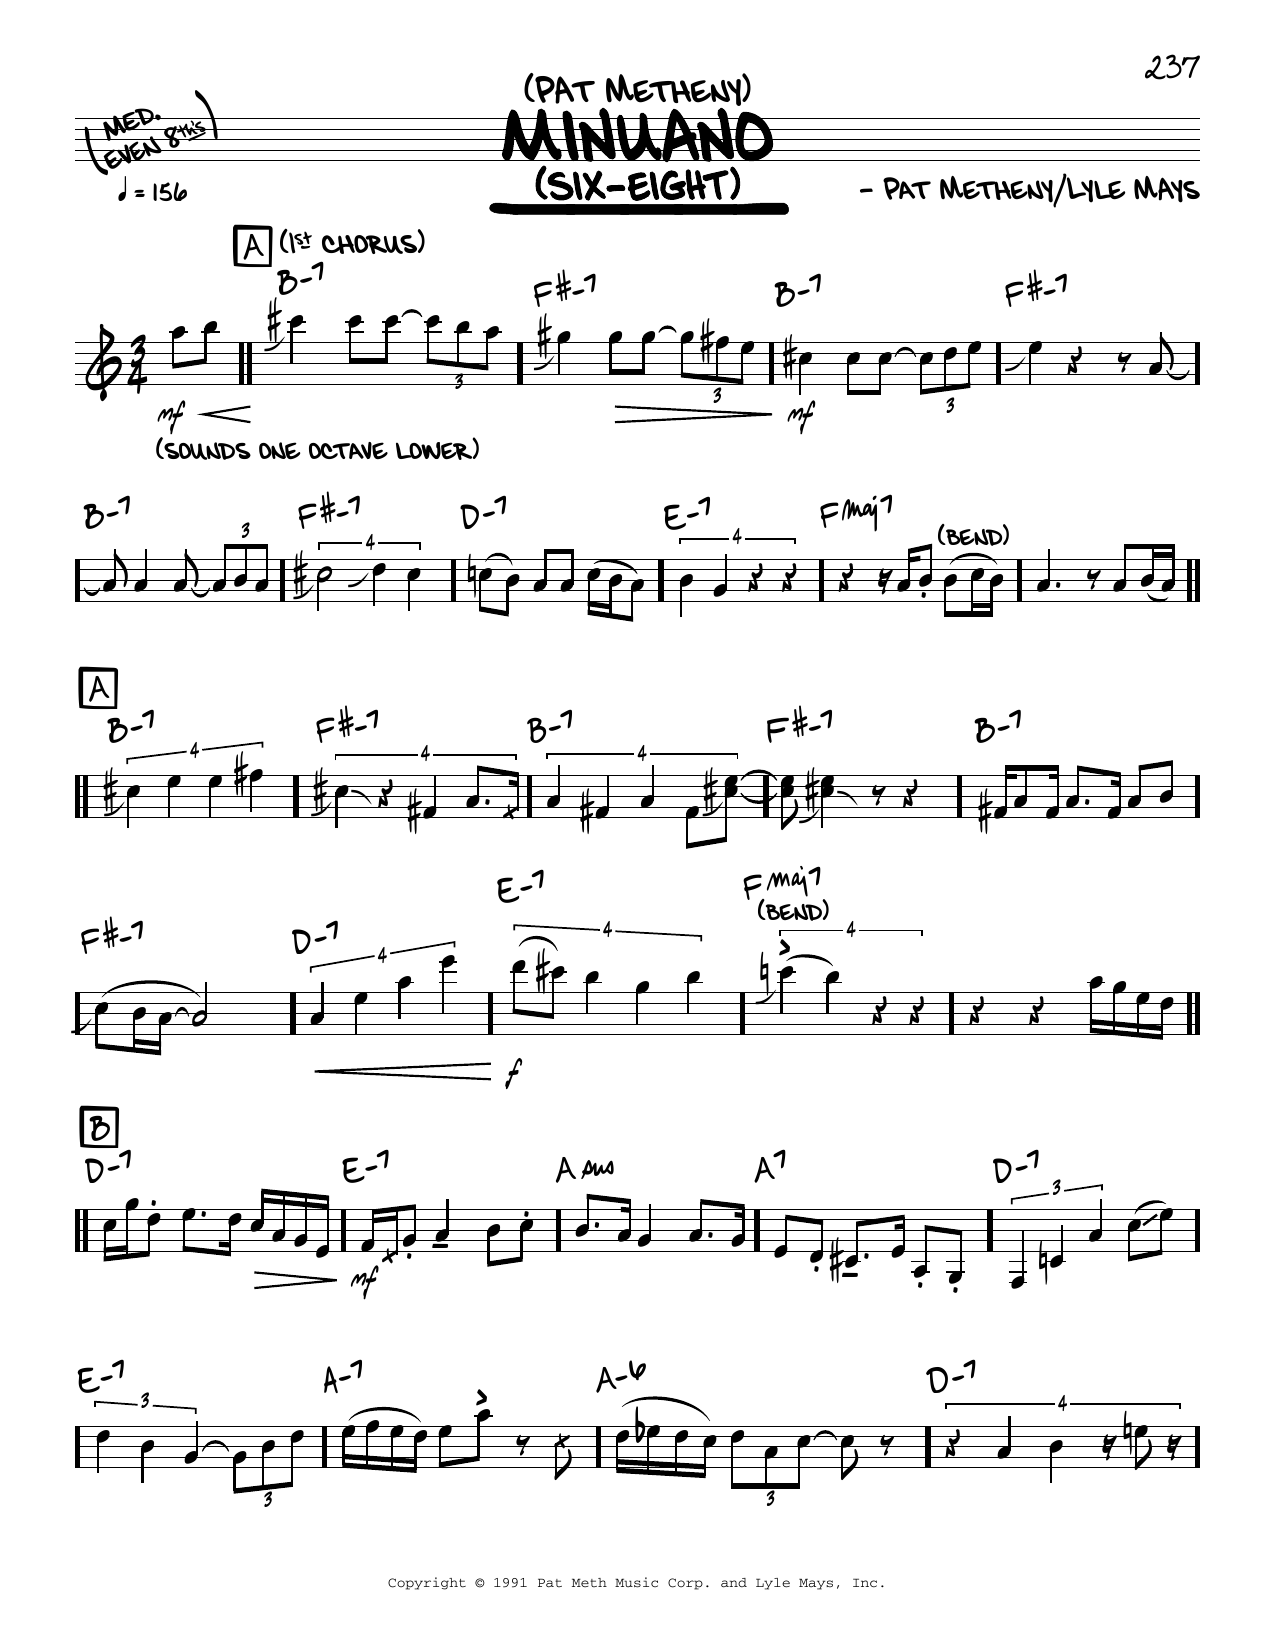 Download Pat Metheny Minuano (Six-Eight) (solo only) Sheet Music